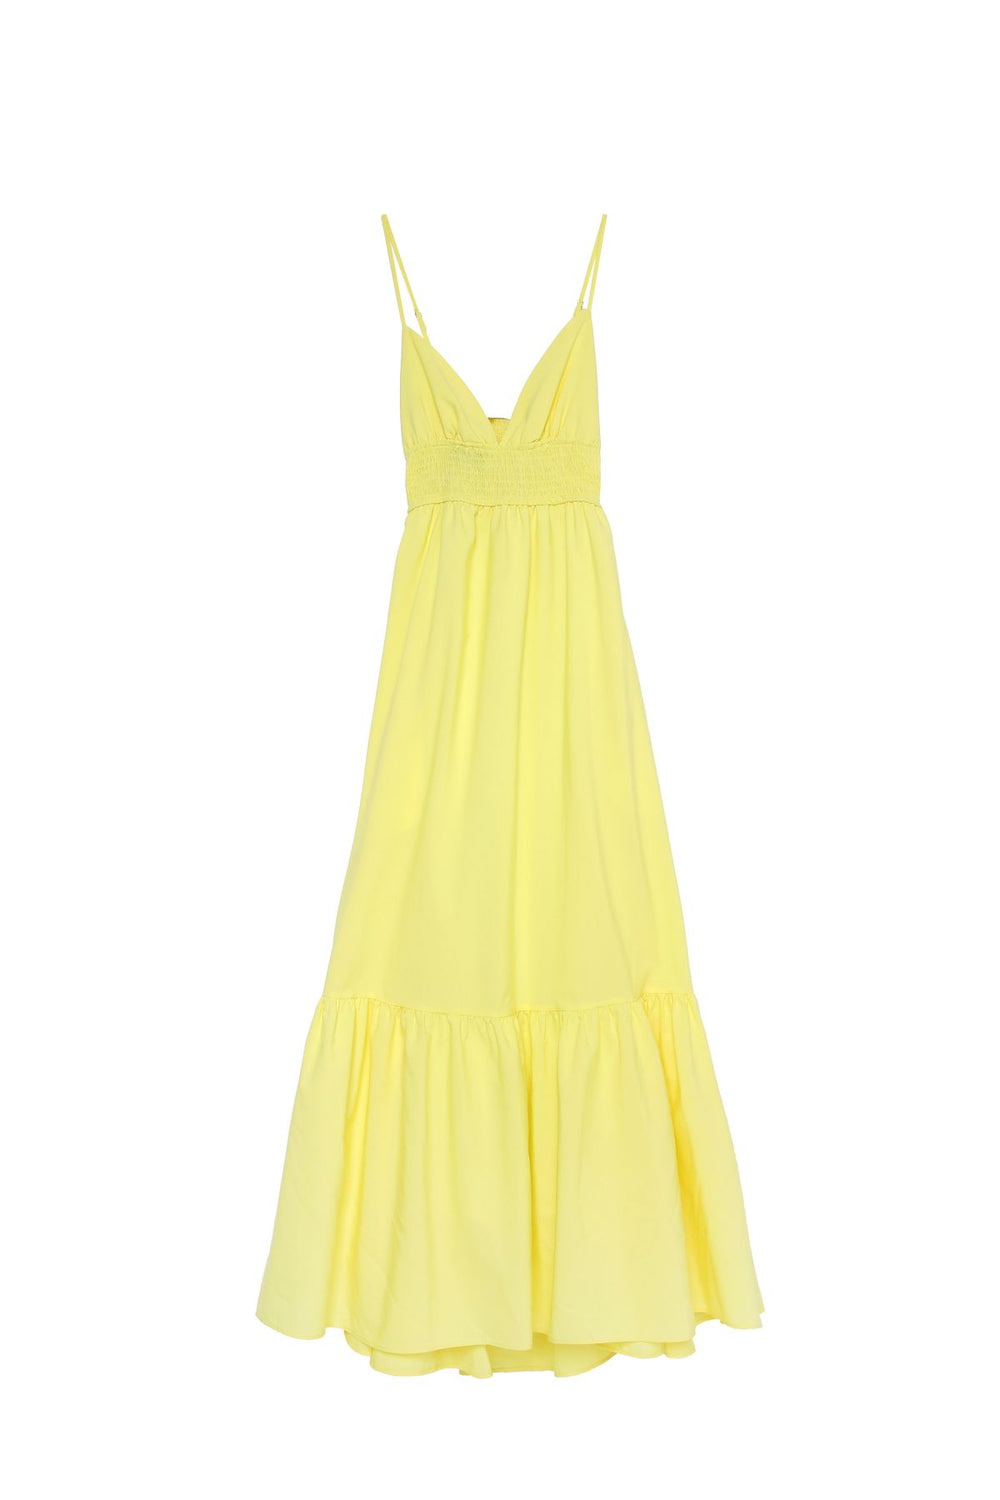 Long Dress Yellow with Low-cut Back and Glued Waist